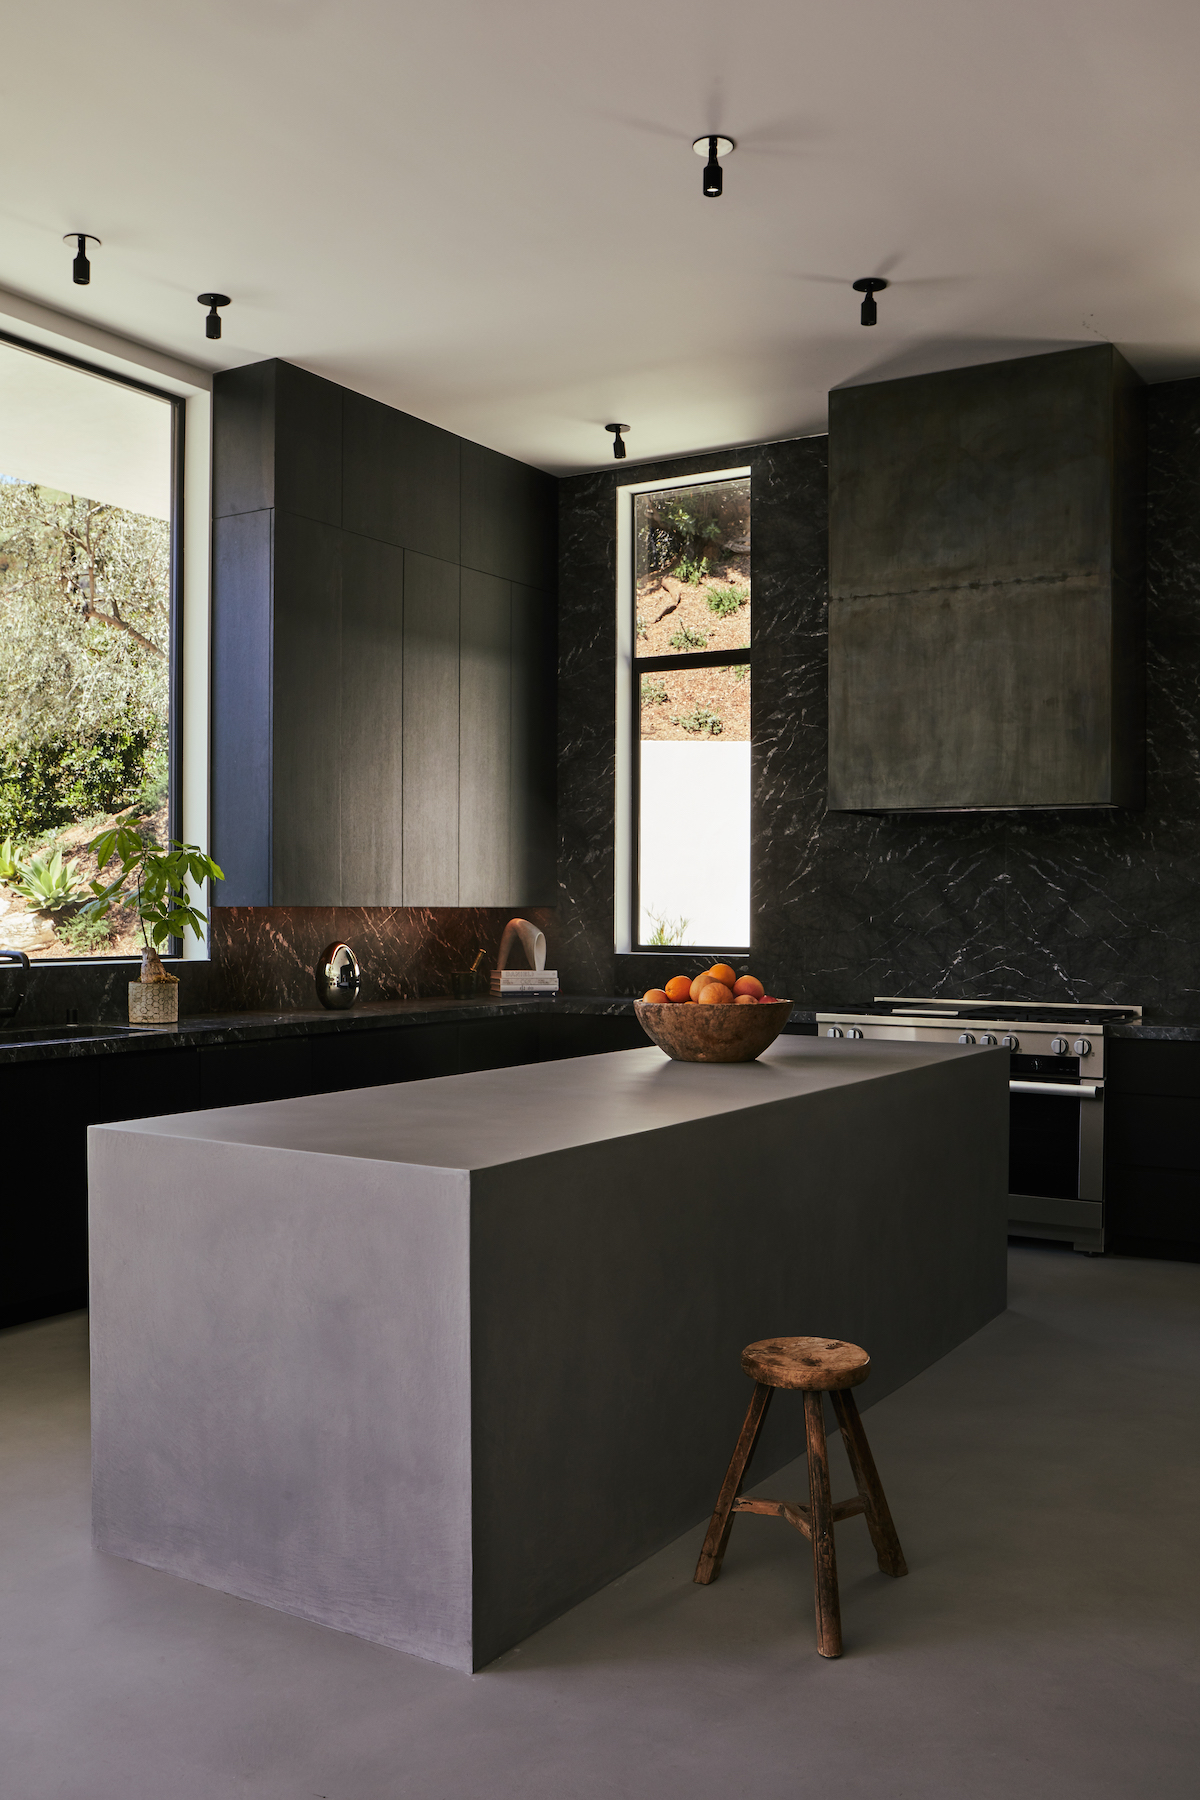 2023 kitchen design trends include extensive use of black marble (Effect Magazine)